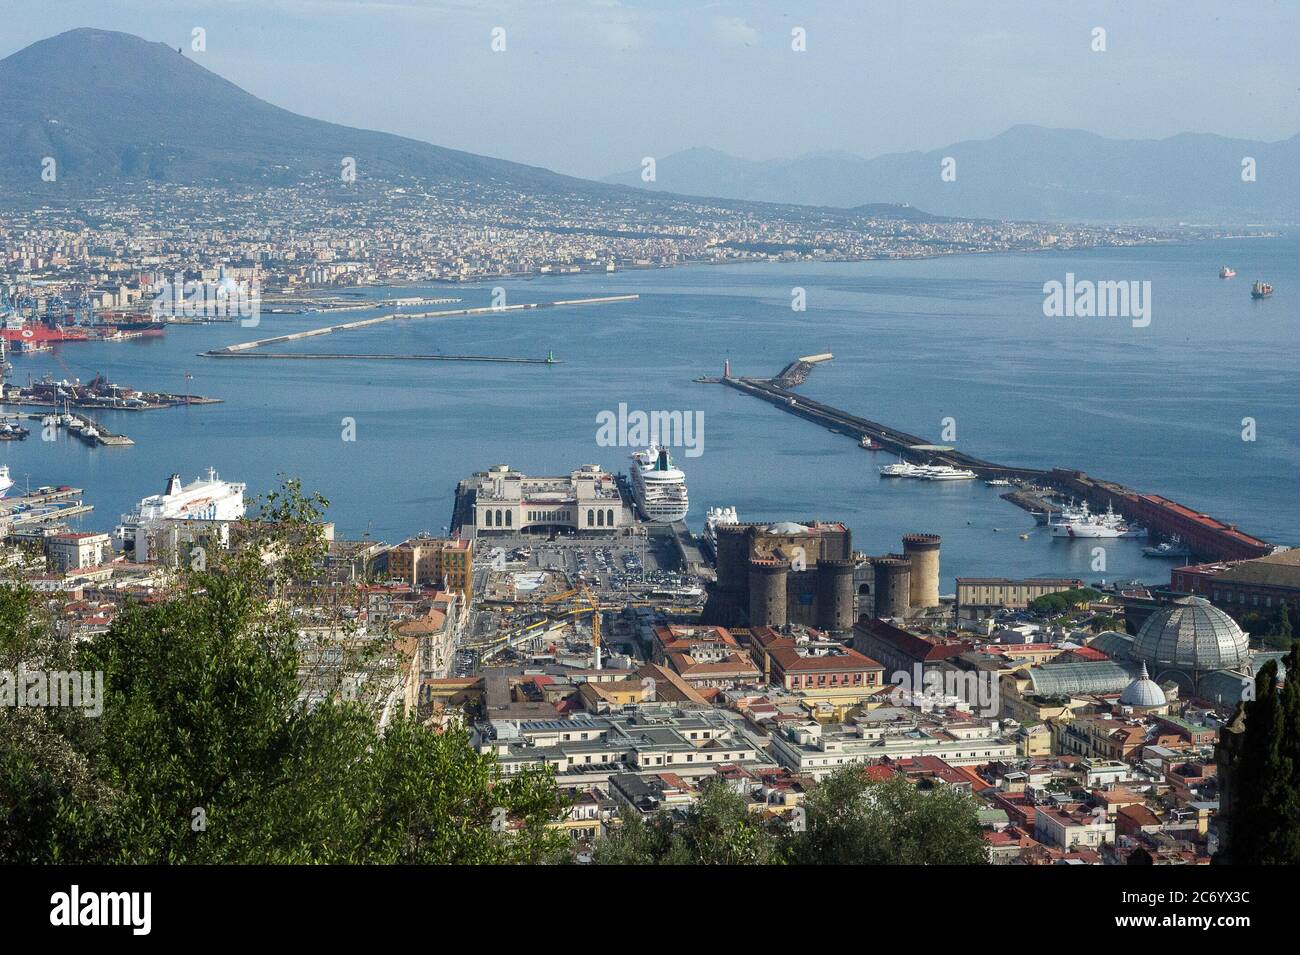 Castel Sant'elmo Vomero High Resolution Stock Photography and Images - Alamy